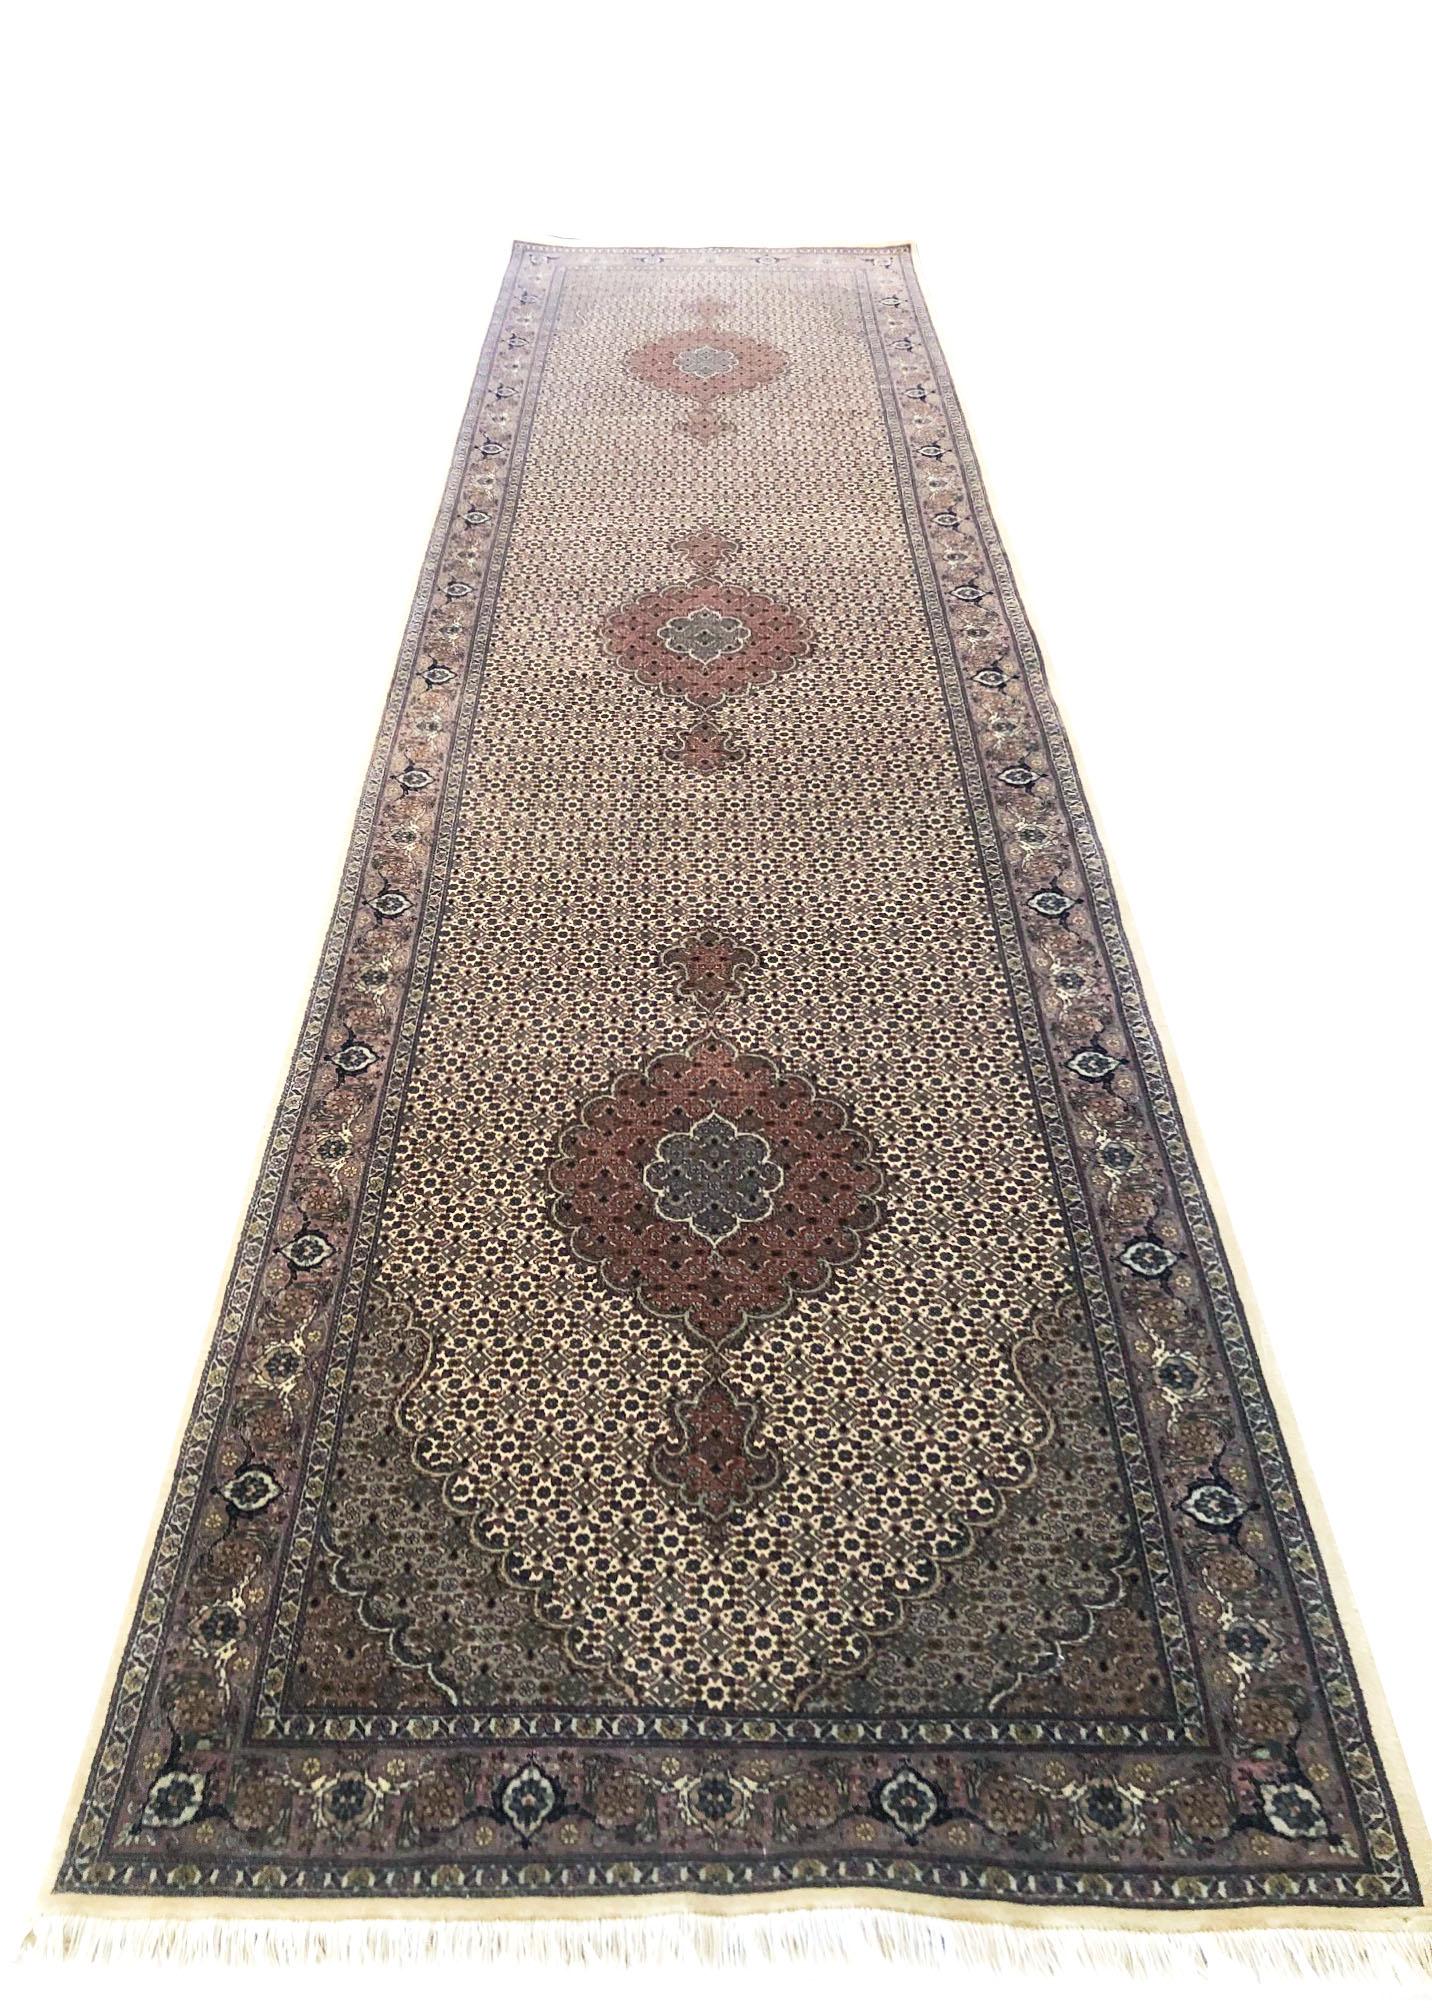 Tabriz rugs are well known for their excellent weaving and design. One of the very famous patterns of Tabriz rugs are Fish Design known as Mahi (repeated medallion) which is one of the classis patterns produced by the masterful carpet in Tabriz.